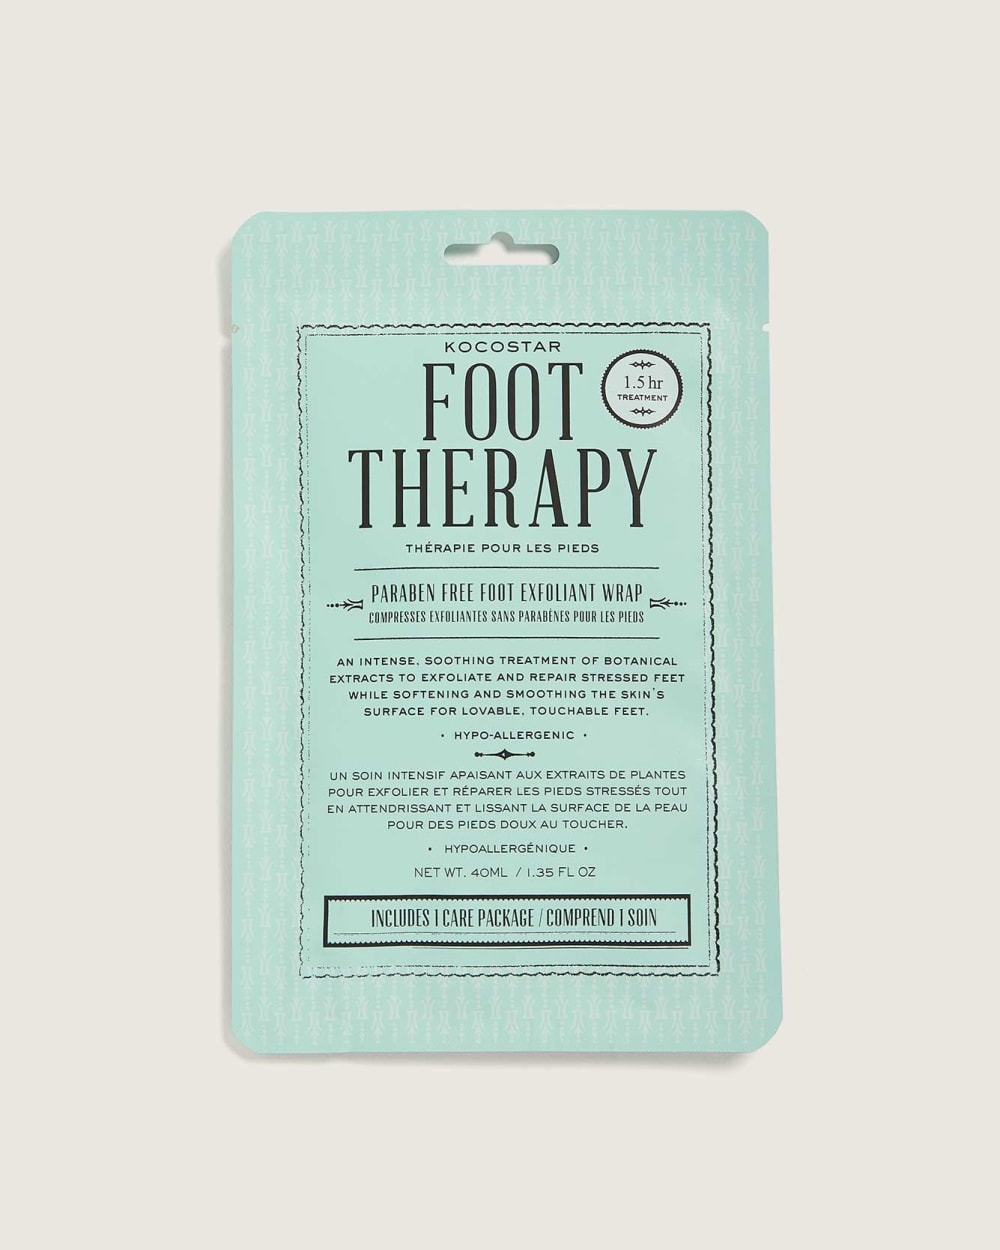 Foot Therapy - KOCOSTAR